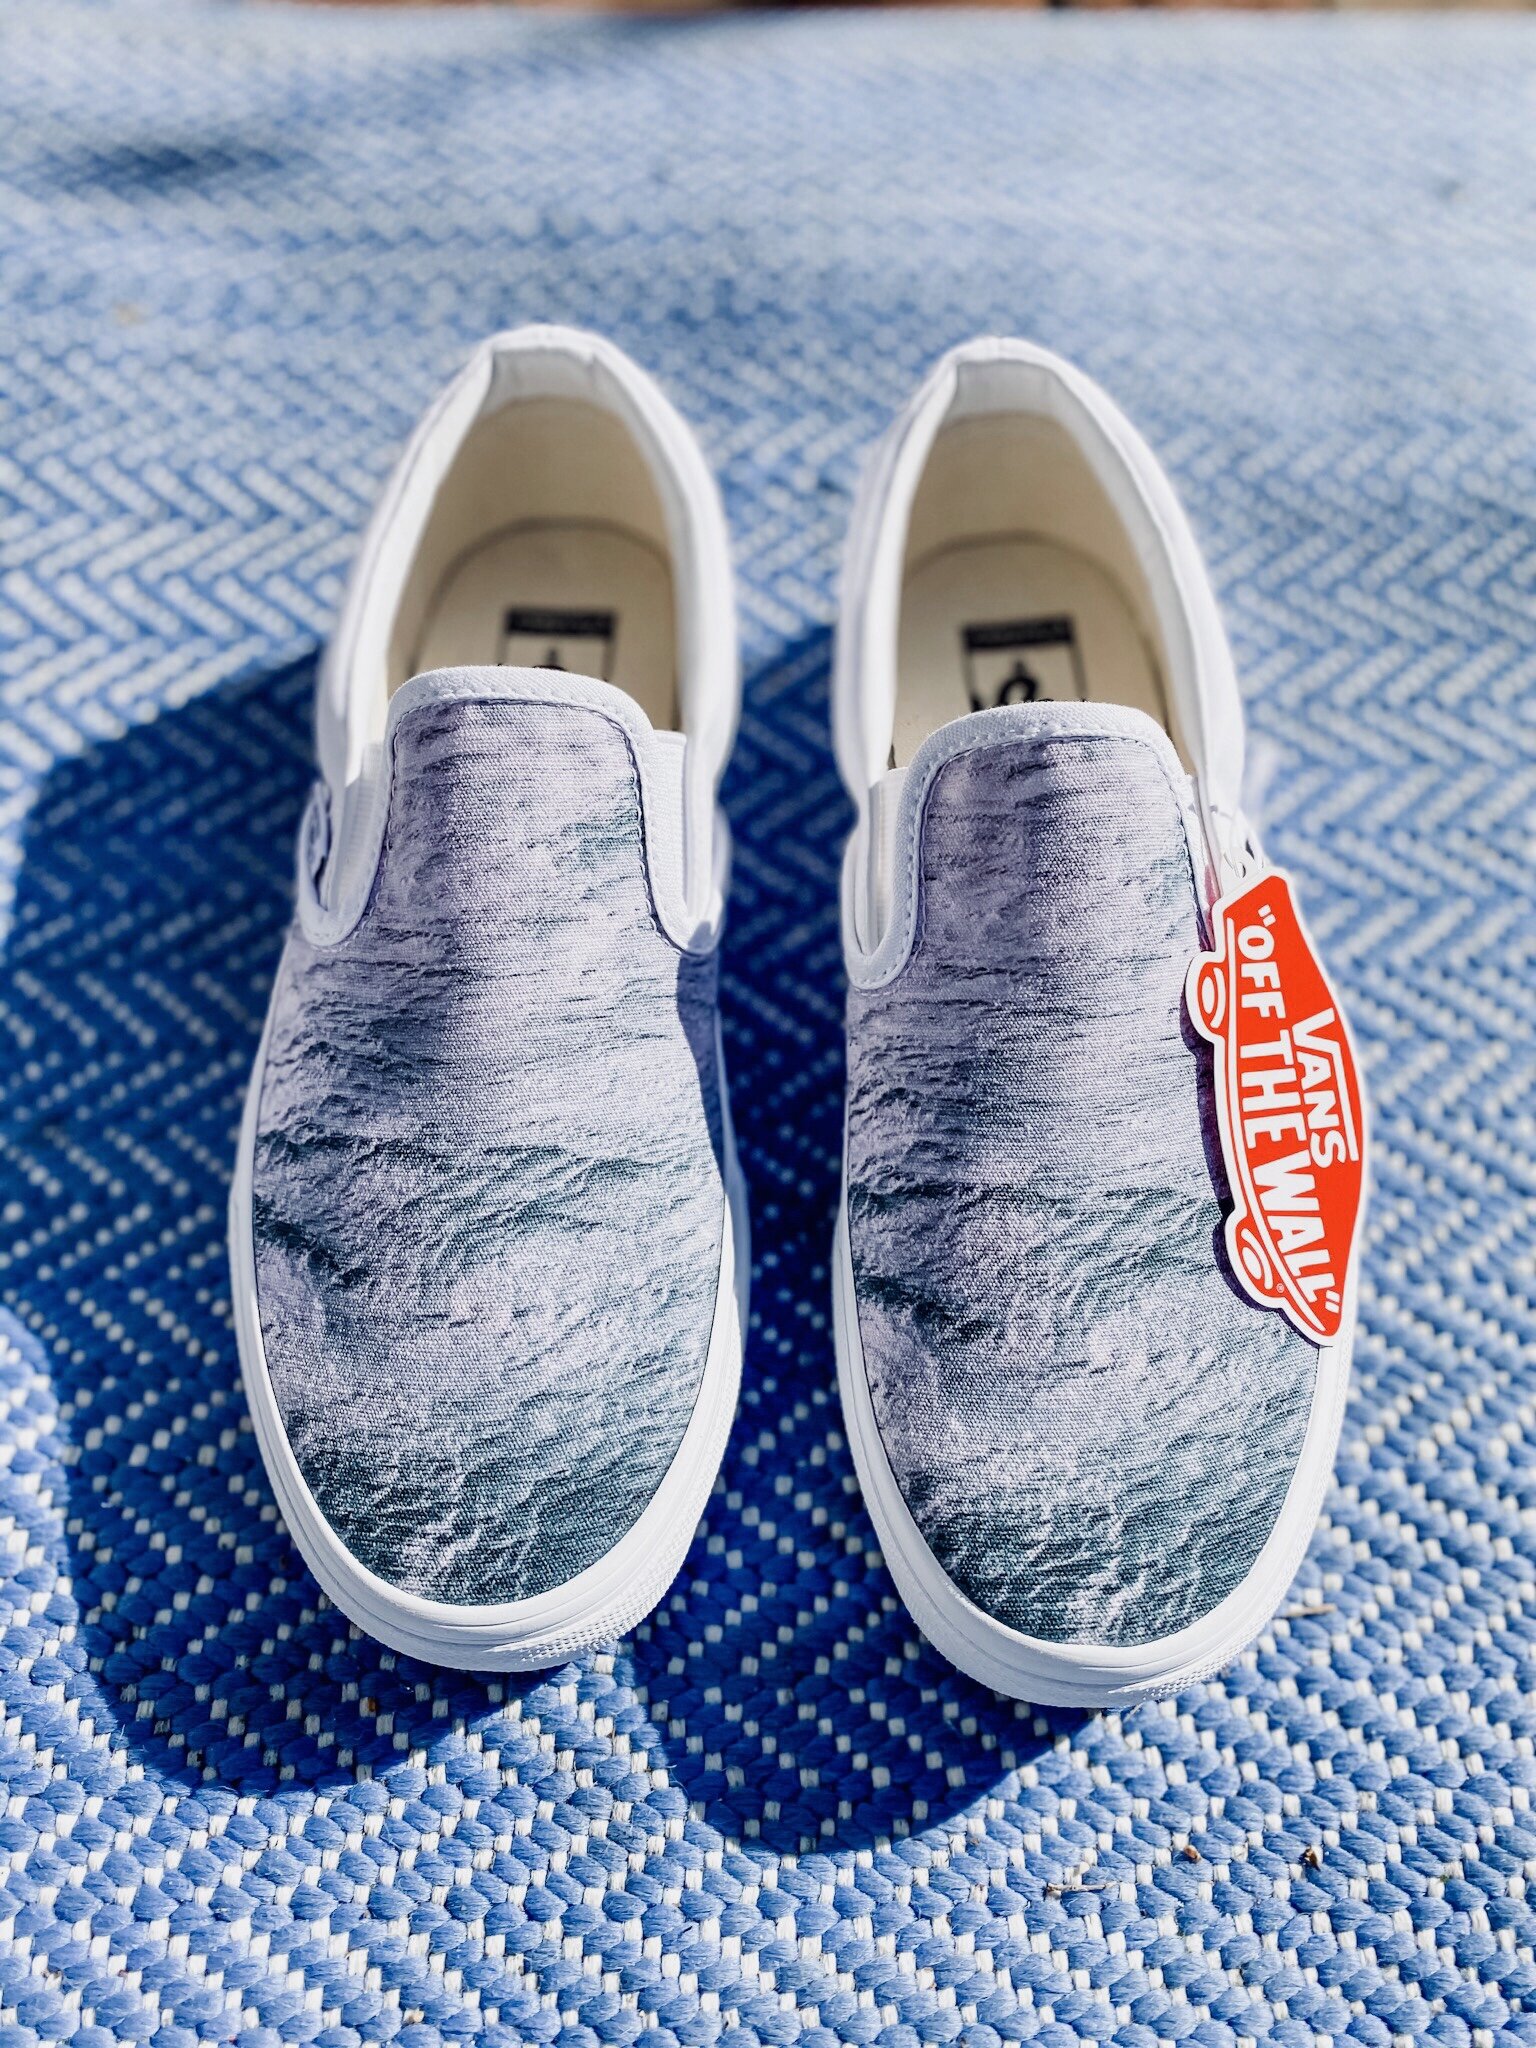 vans limited edition